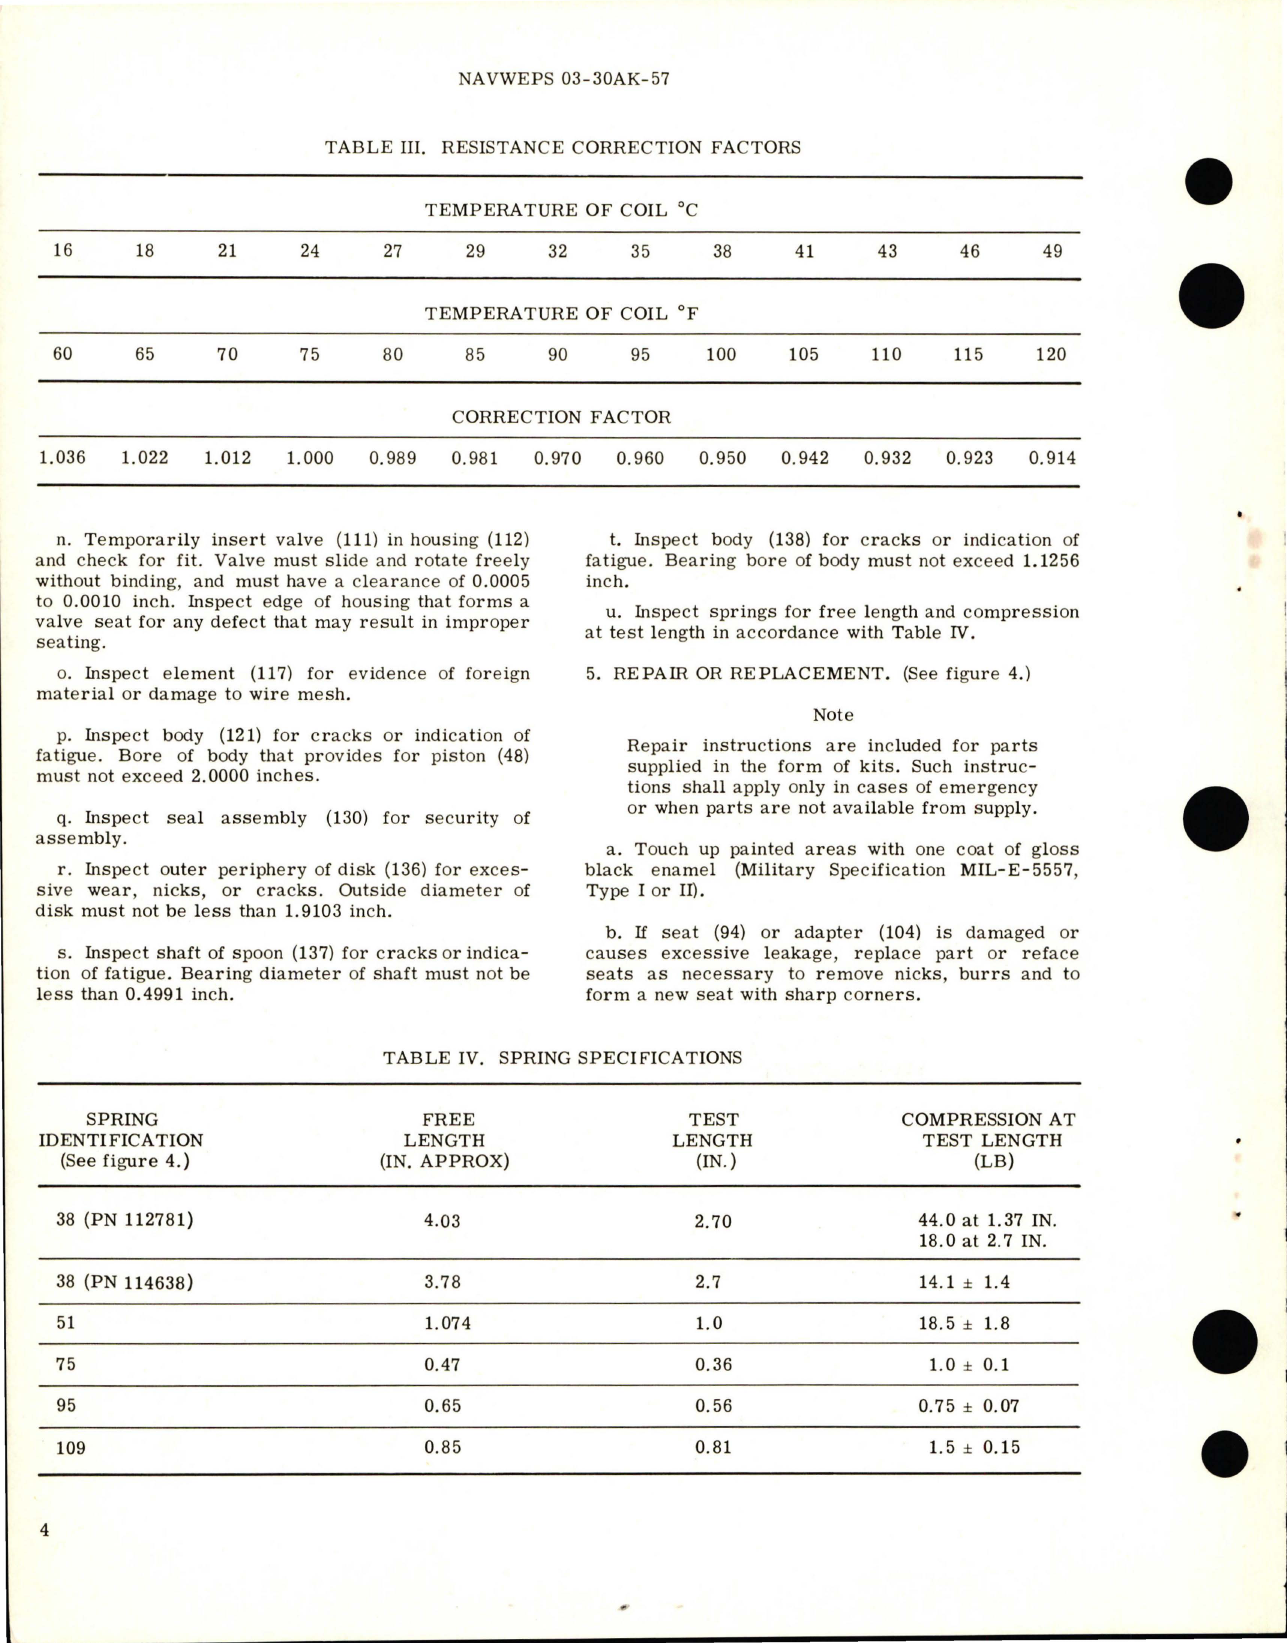 Sample page 6 from AirCorps Library document: Overhaul Instructions with Parts Breakdown for Shutoff Differential Pressure Regulator - Part 108420 - Model APR21-18-1